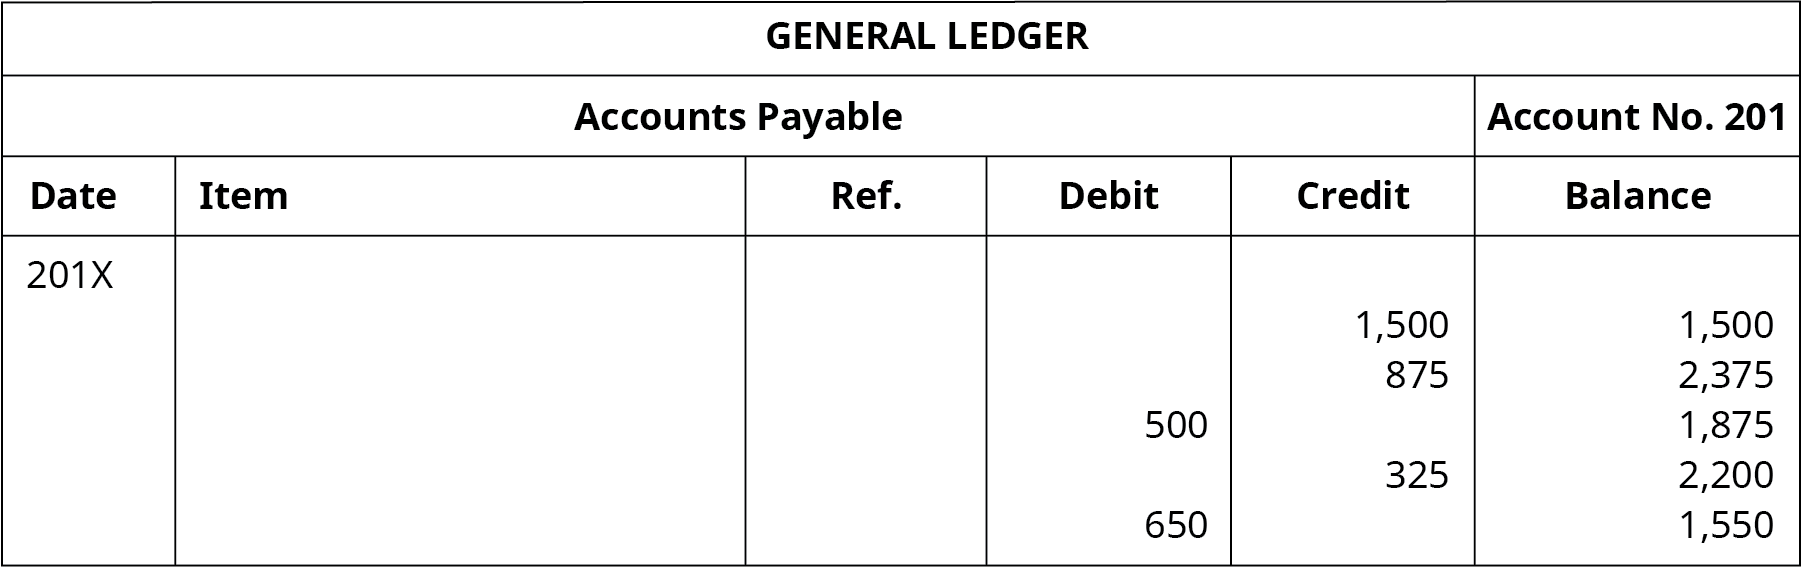 A General Ledger titled “Accounts Payable No. 201” with six columns. Date: 2019. Six columns labeled left to right: Date, Item, Reference, Debit, Credit, Balance. Credit: 1,500; Balance: 1,500. Credit: 875; Balance: 2,375. Debit: 500; Balance: 1,875. Credit: 325; Balance: 2,200. Debit: 650; Balance: 1,550.